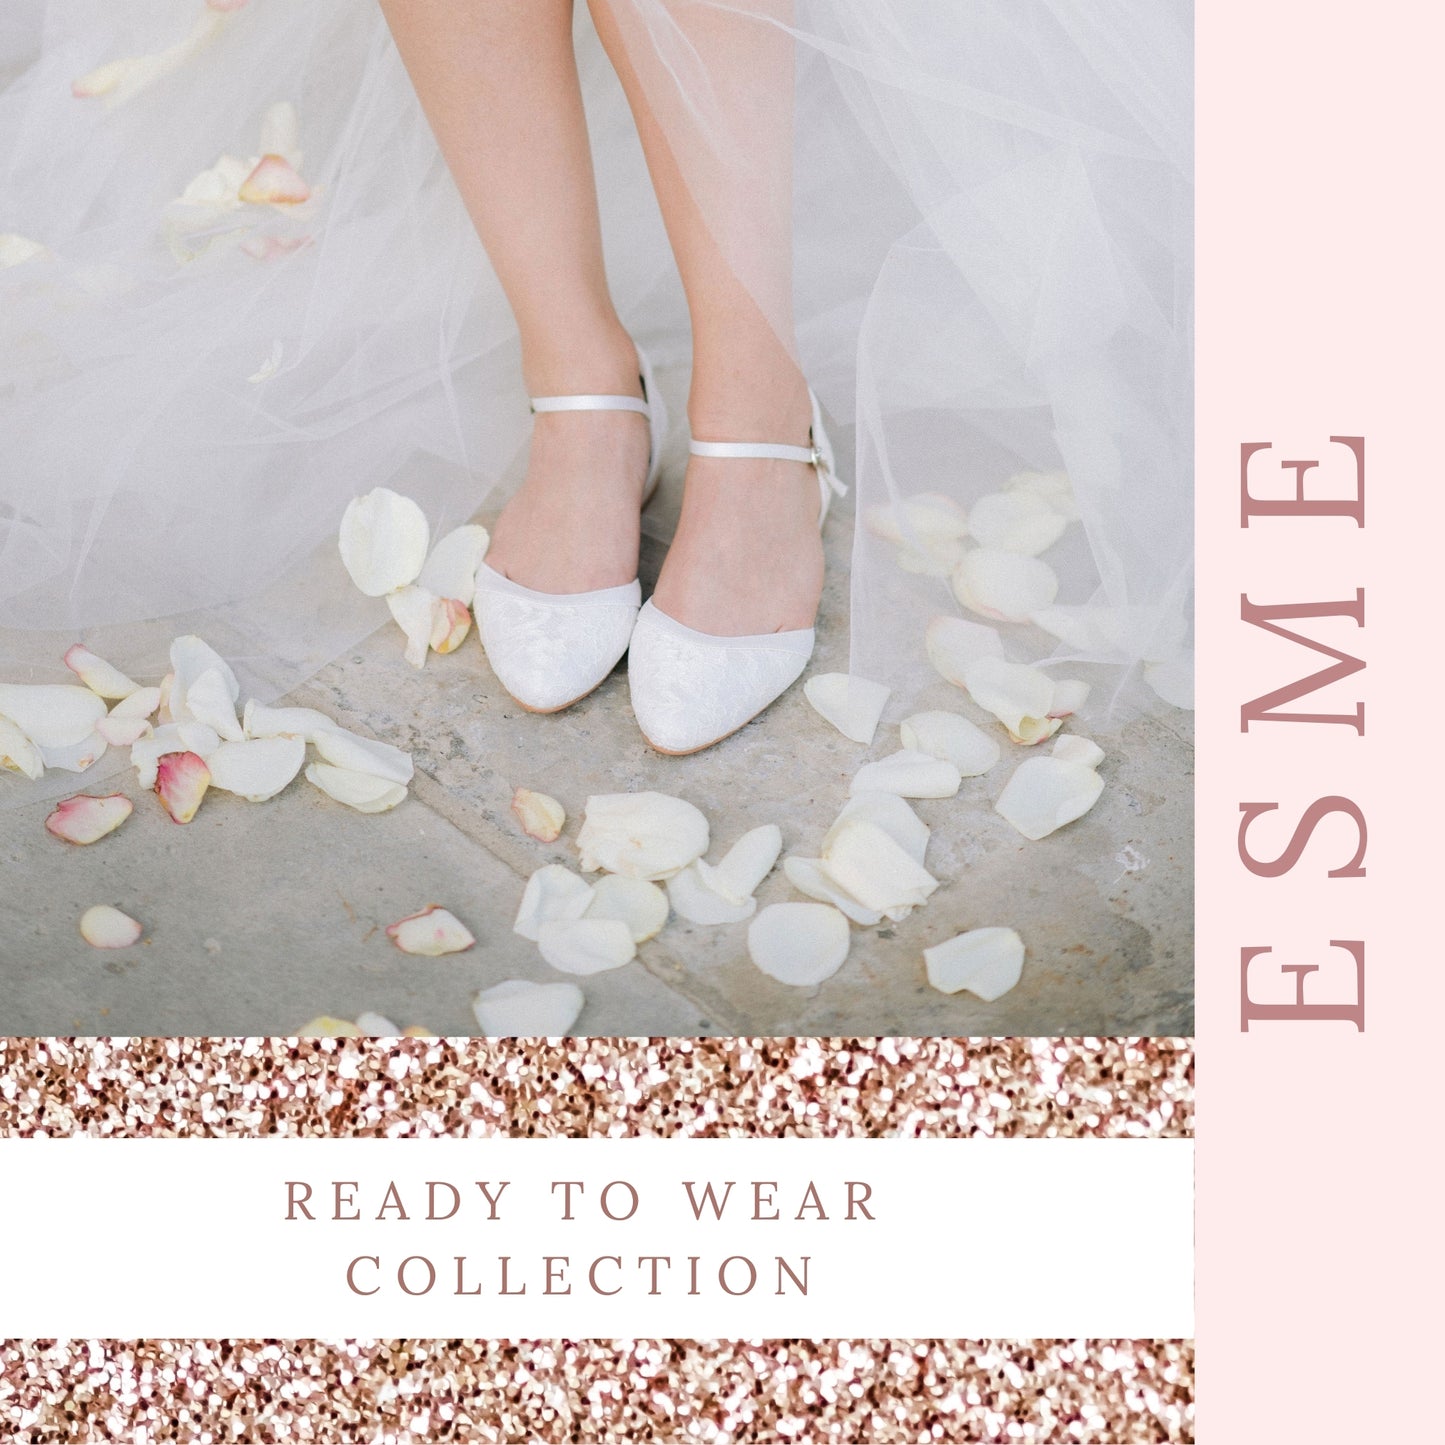 Lace Wedding Shoes Low Heel | Wedding Shoes Low Heel Closed Toe